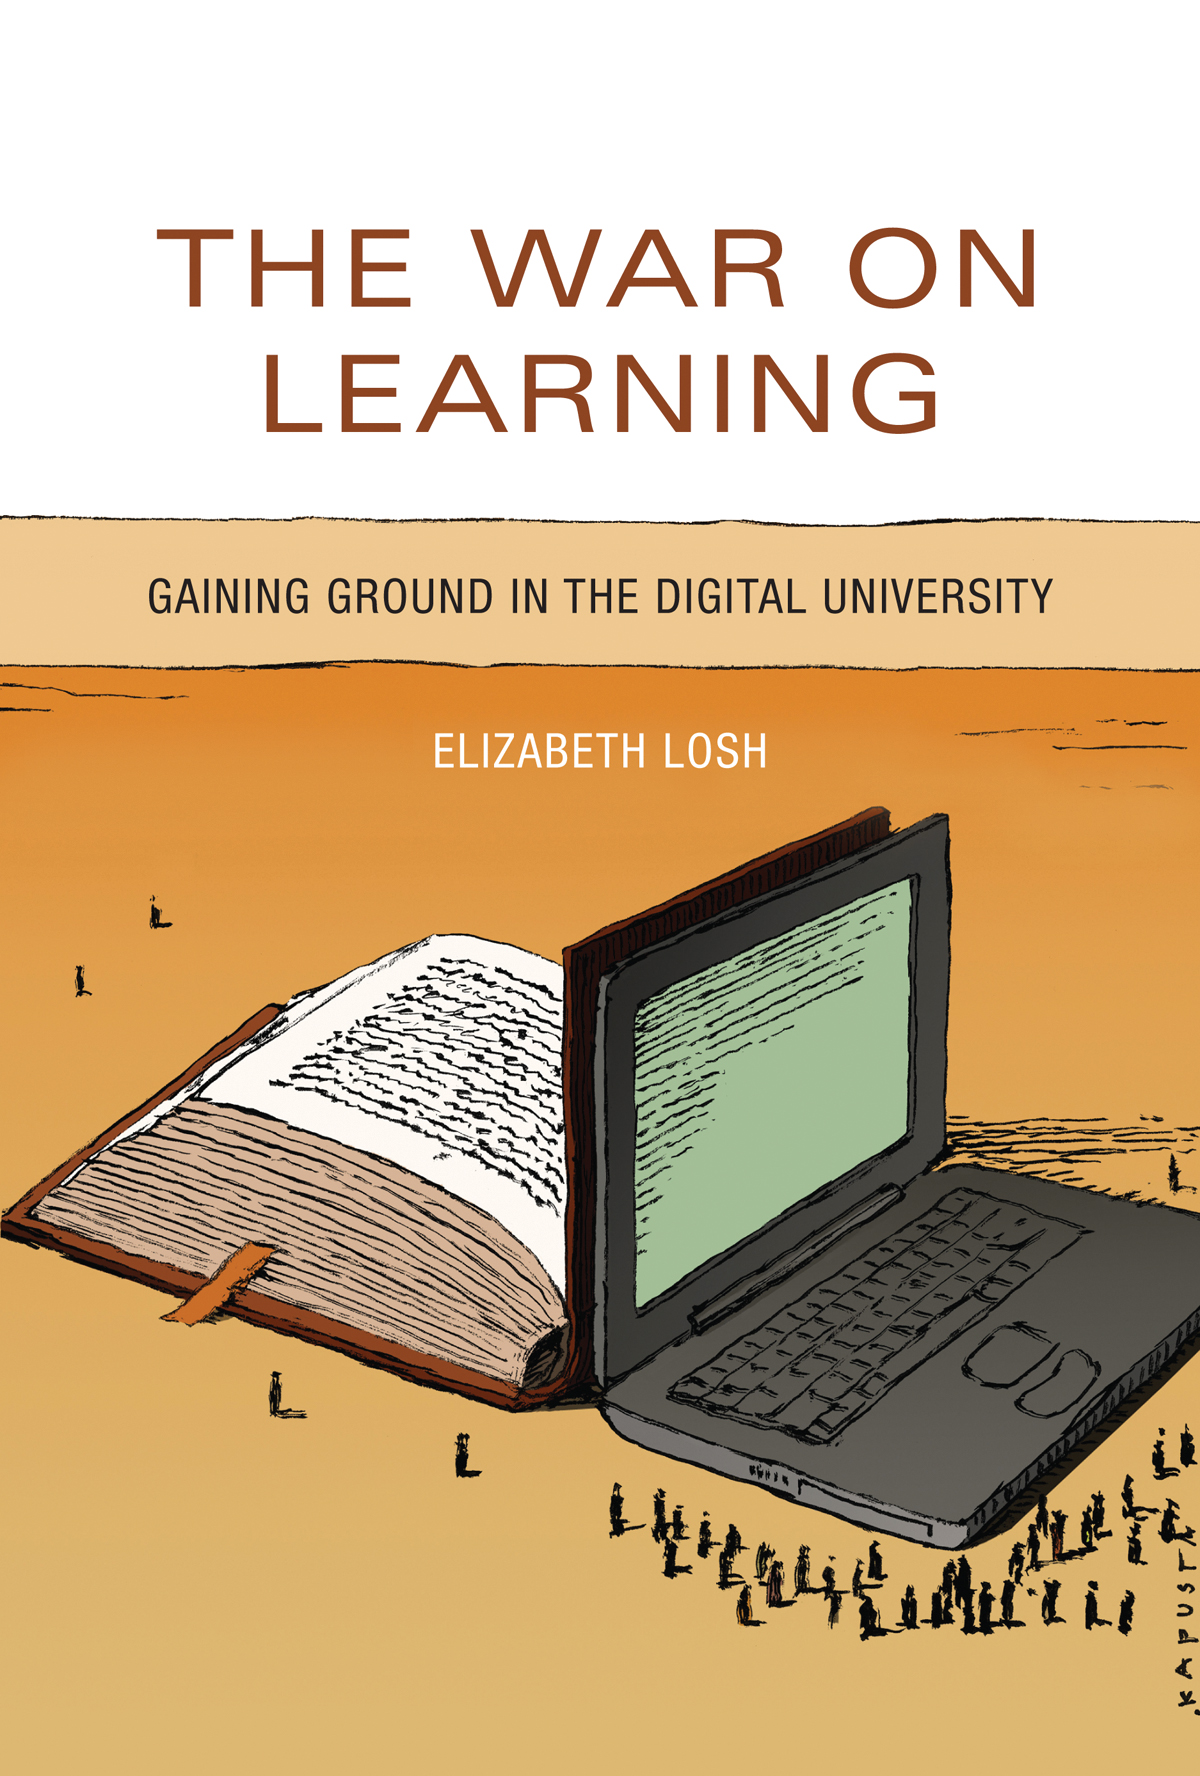 Cover of The War on Learning. Caption includes links to find the book.